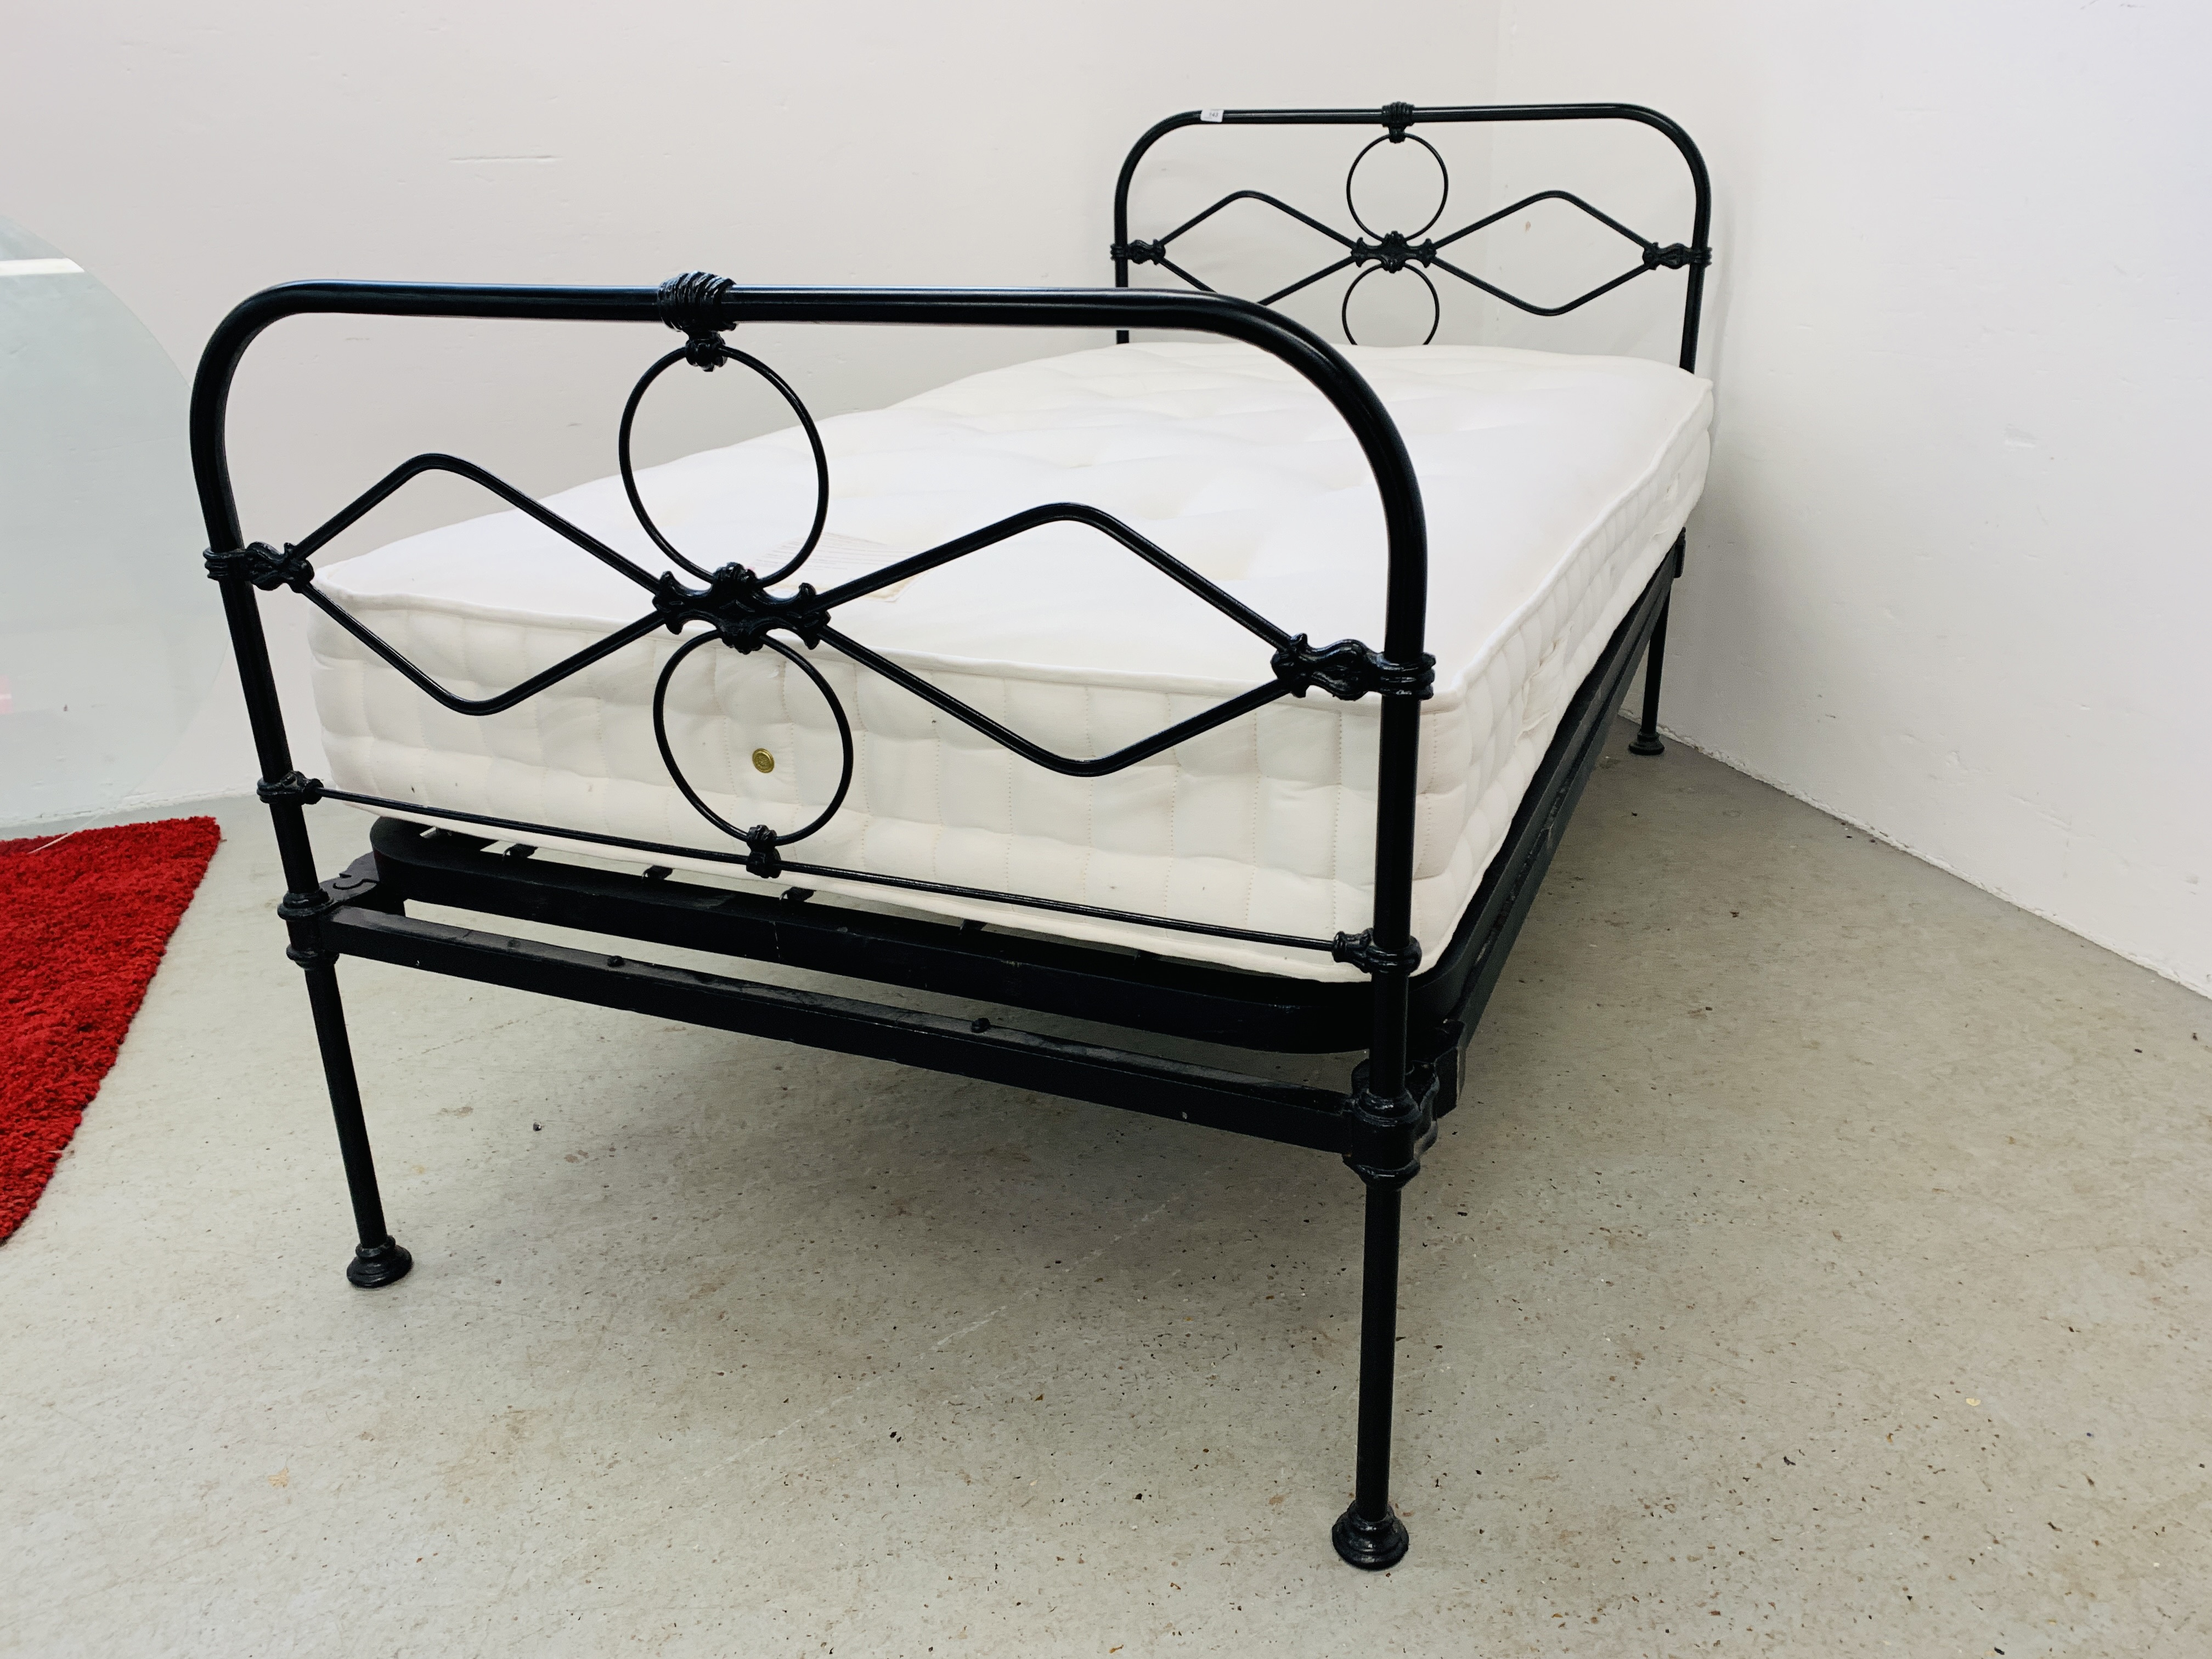 A VICTORIAN STYLE SINGLE IRON FRAMED BEDSTEAD WITH JOHN LEWIS LUXURY MATTRESS. - Image 2 of 16